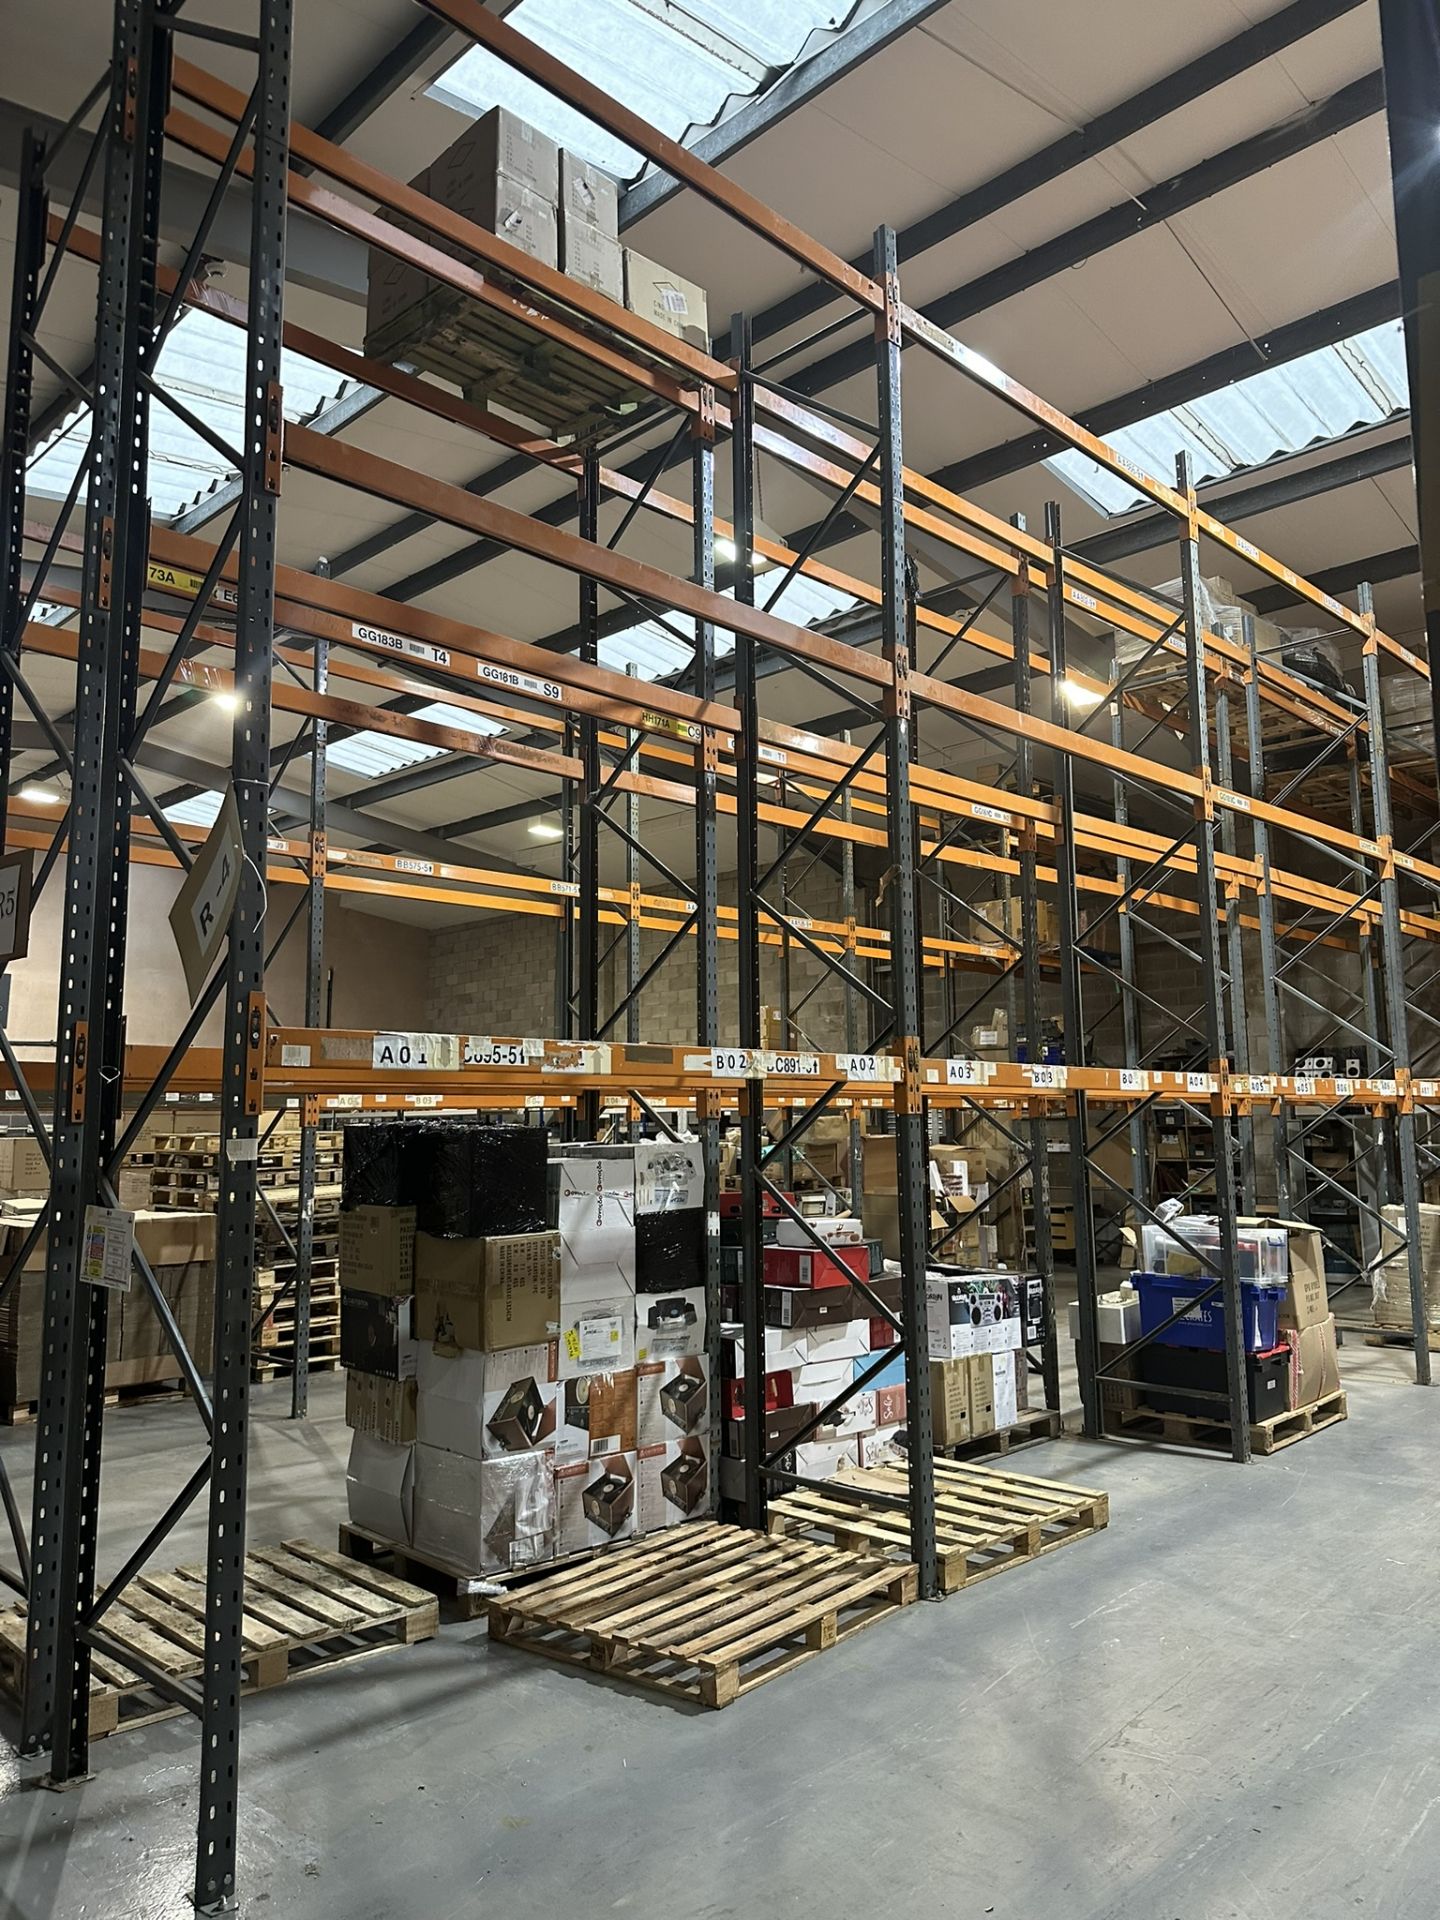 30 x Bays of 3 Tier Heavy-Duty 5.4T Capacity Pallet Racking | CONTENTS NOT INCLUDED - Image 3 of 5